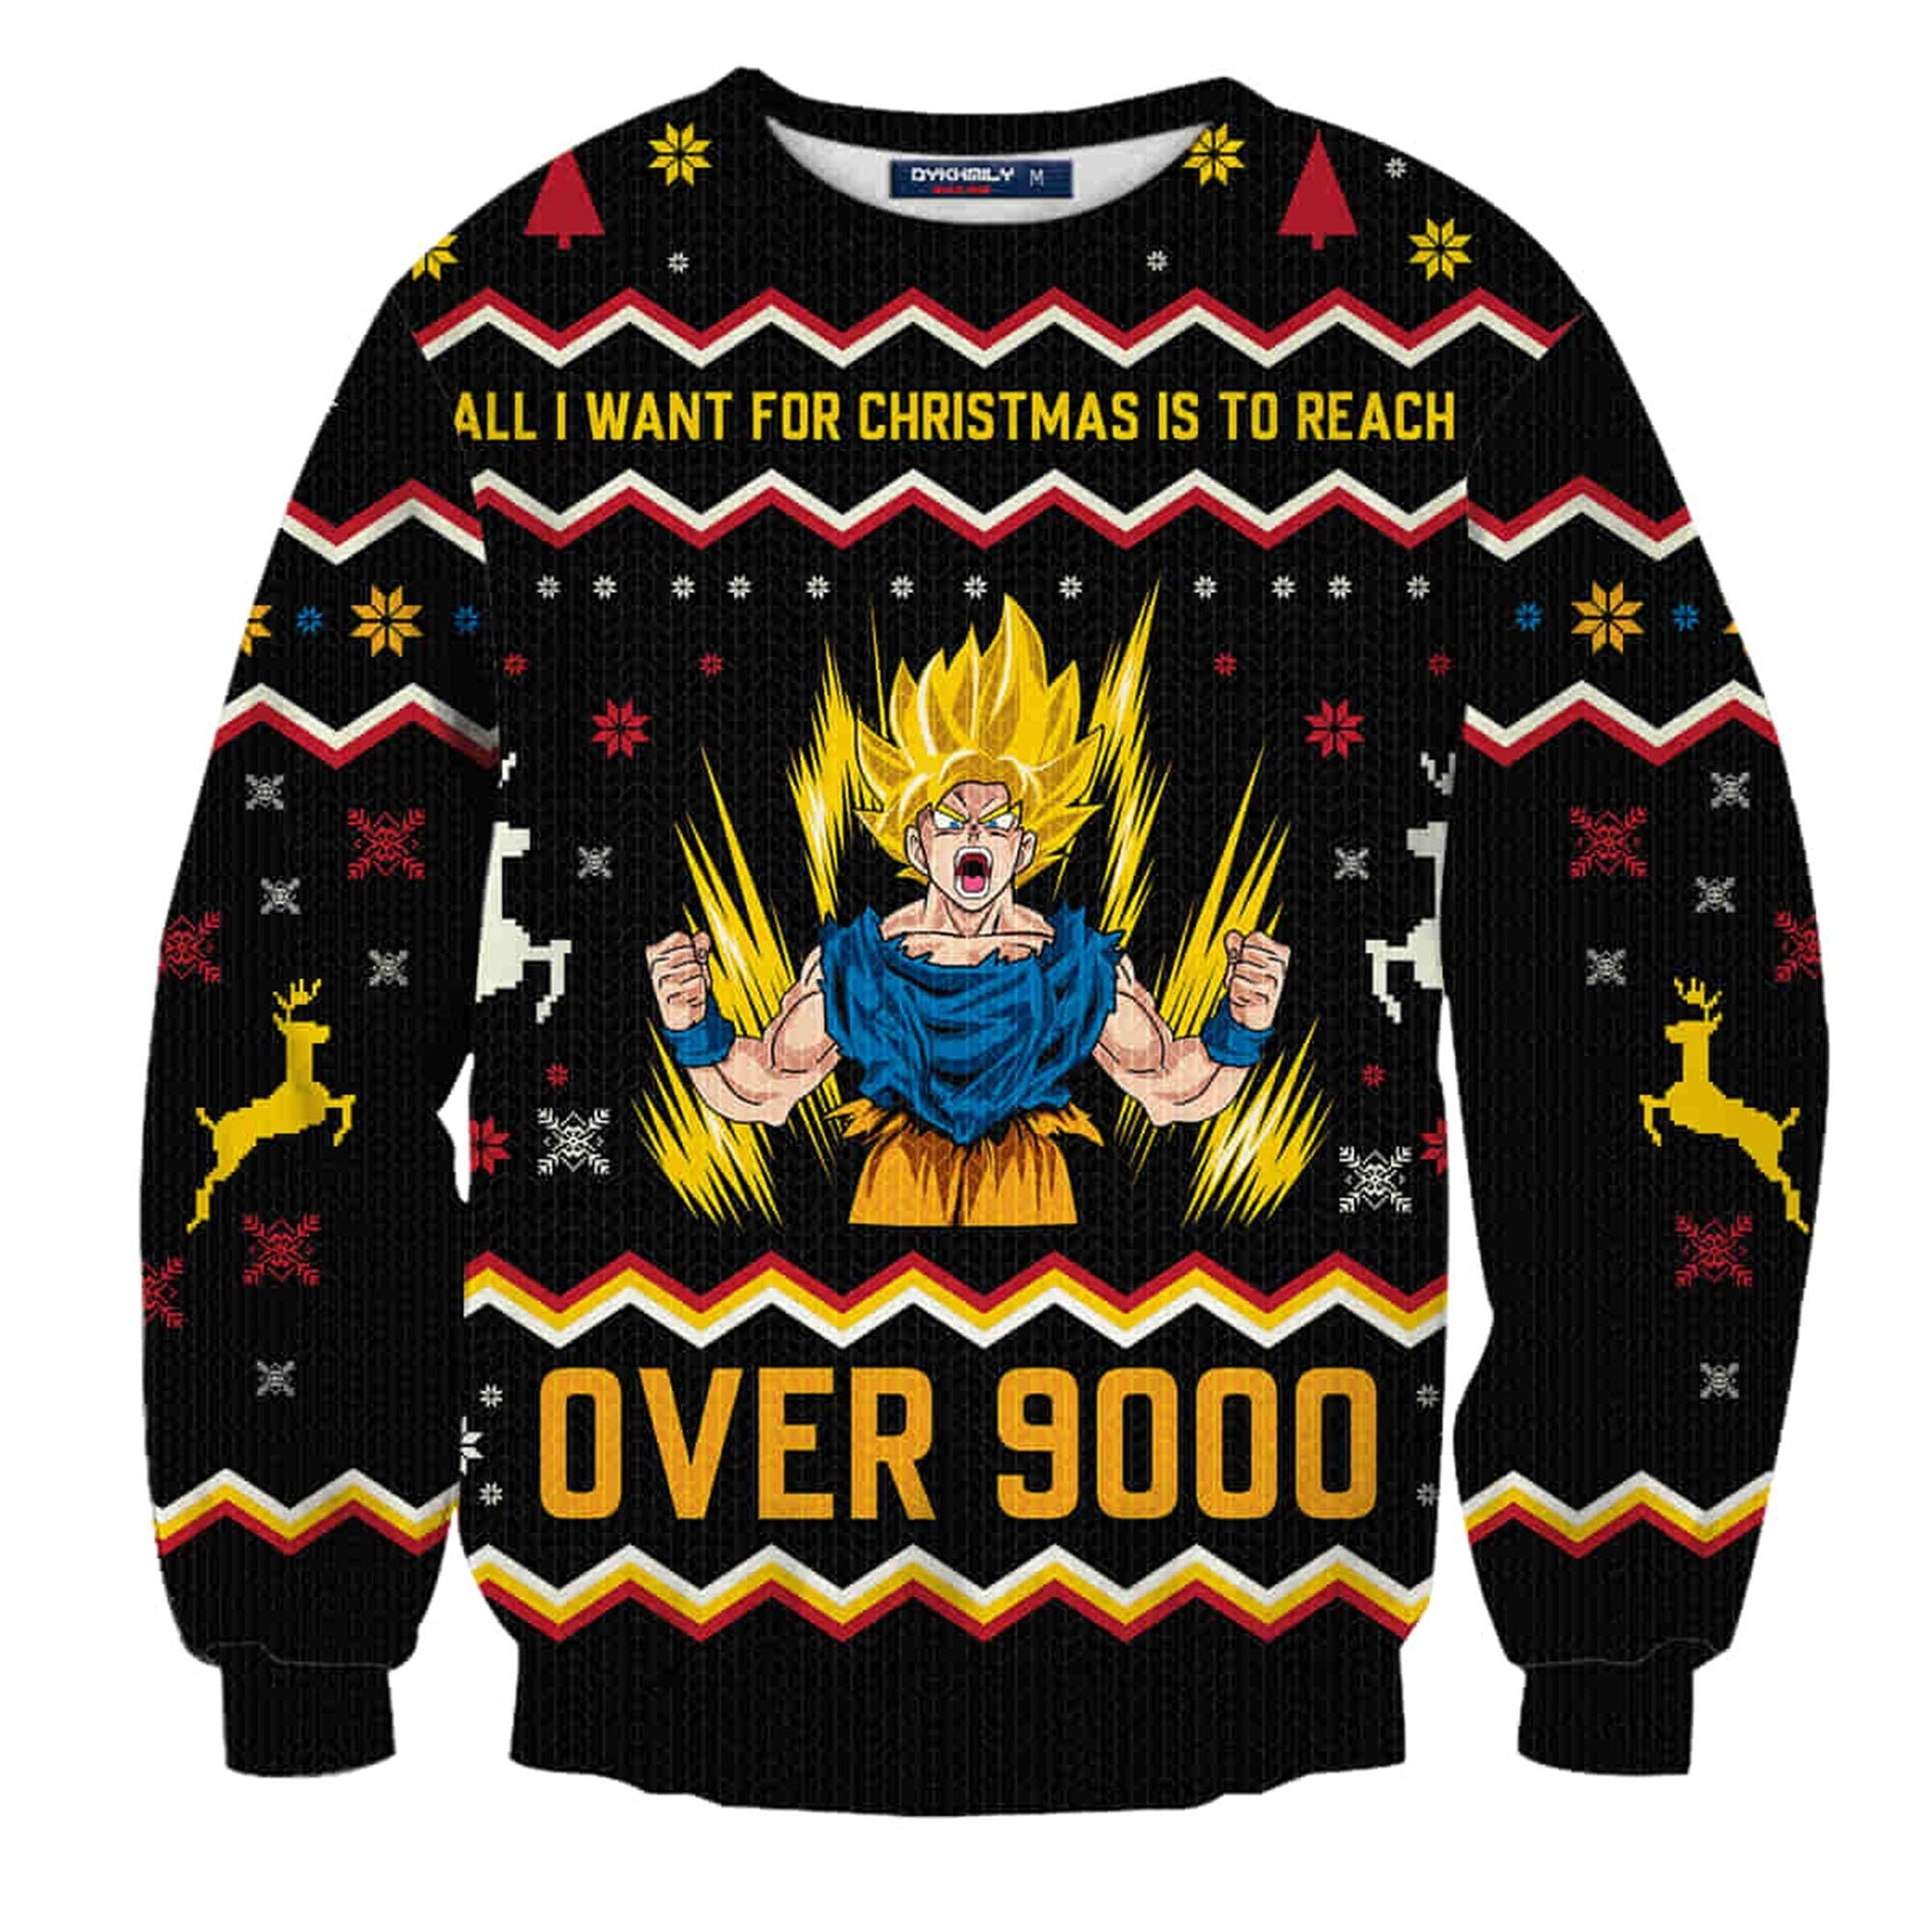 All I Want For Christmas Is To Reach Over - Ugly Sweater